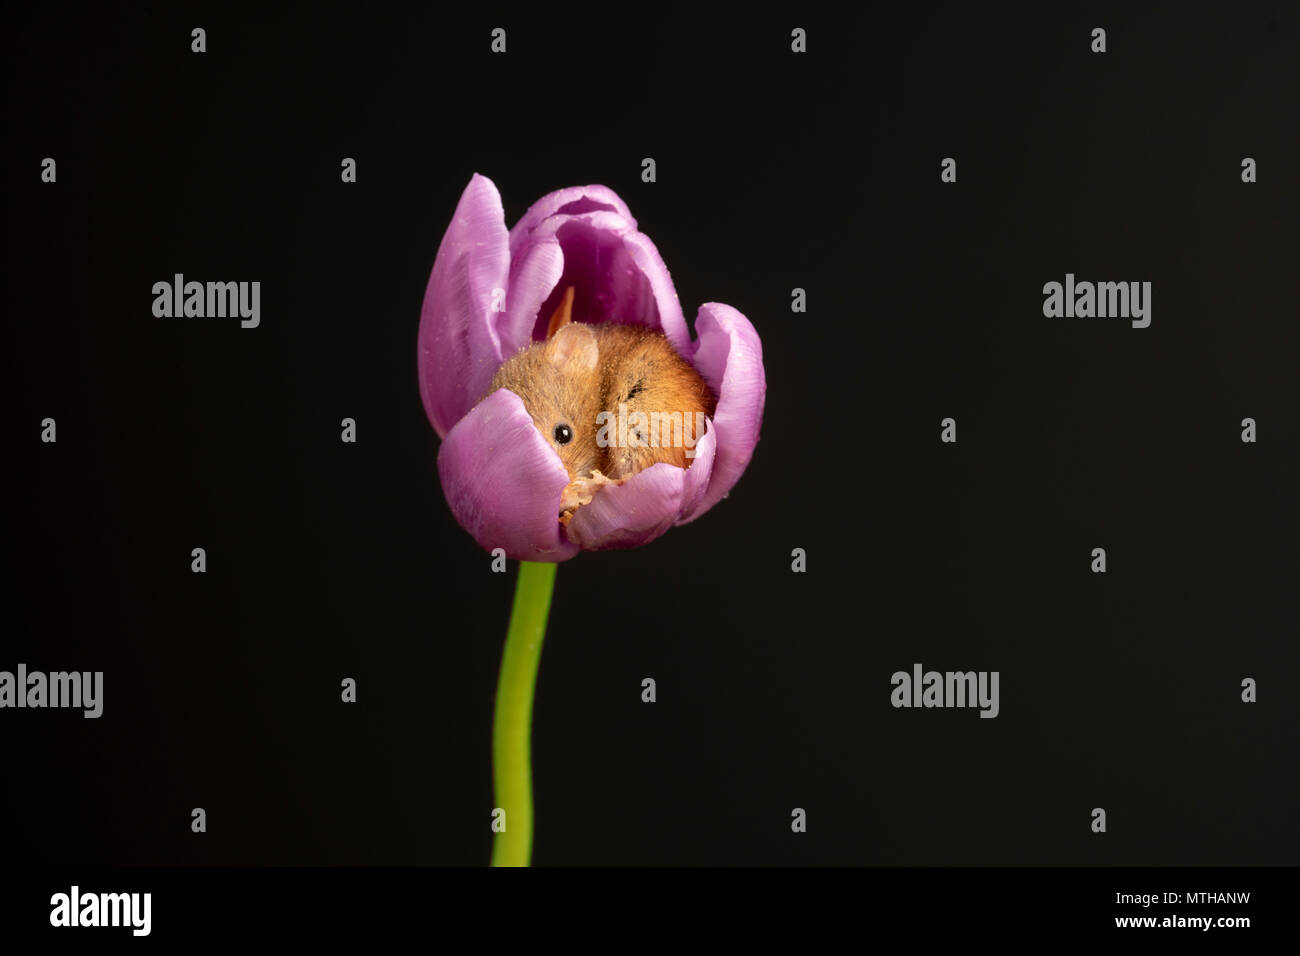 a little harvest mouse curled sleeping ina  tulip Stock Photo